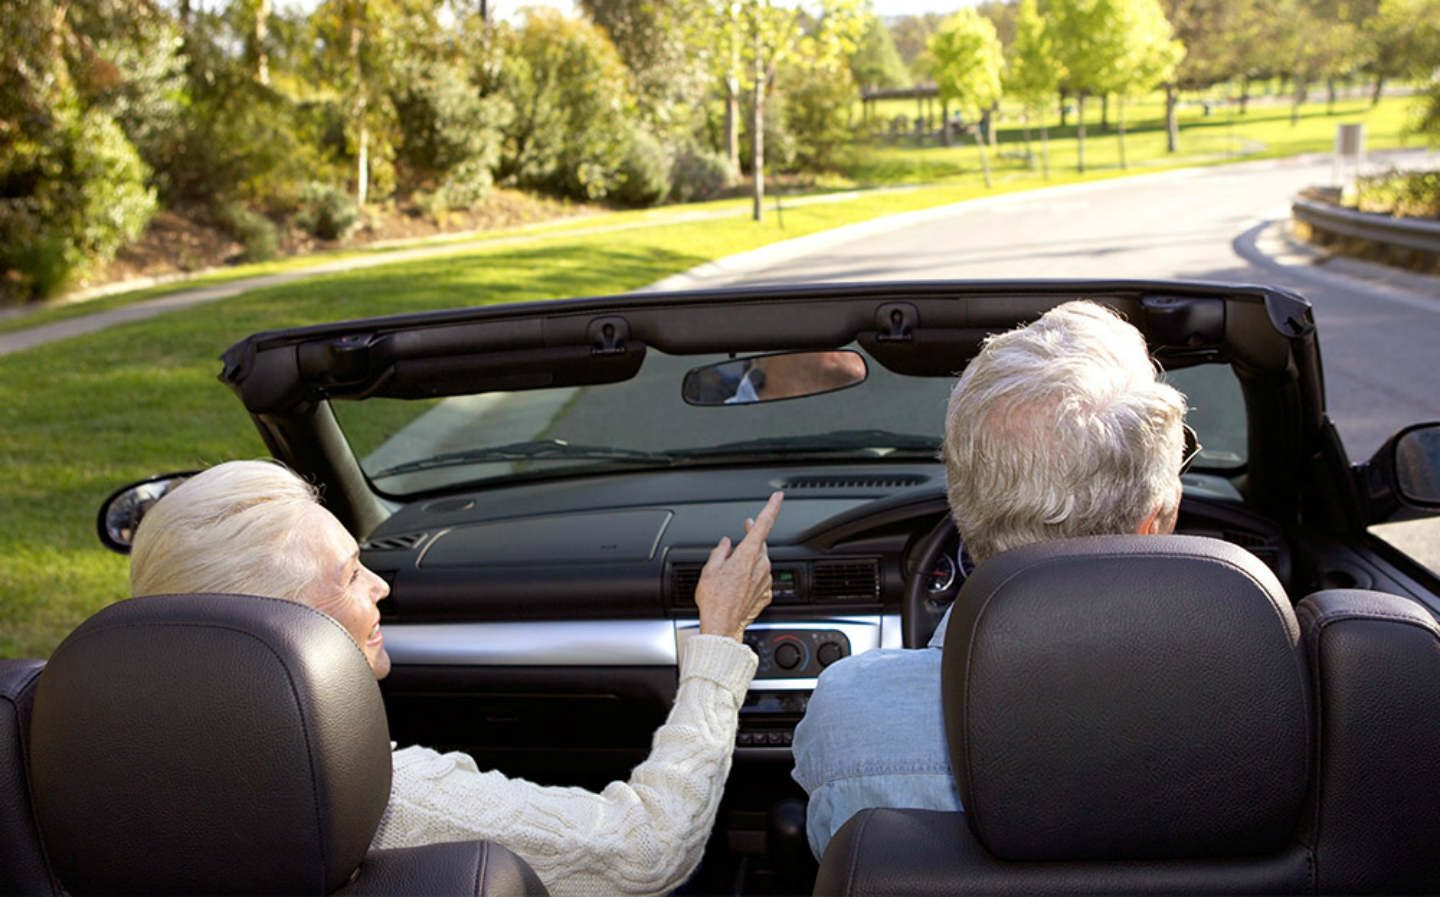 Over 40% of motorists want older drivers to be banned